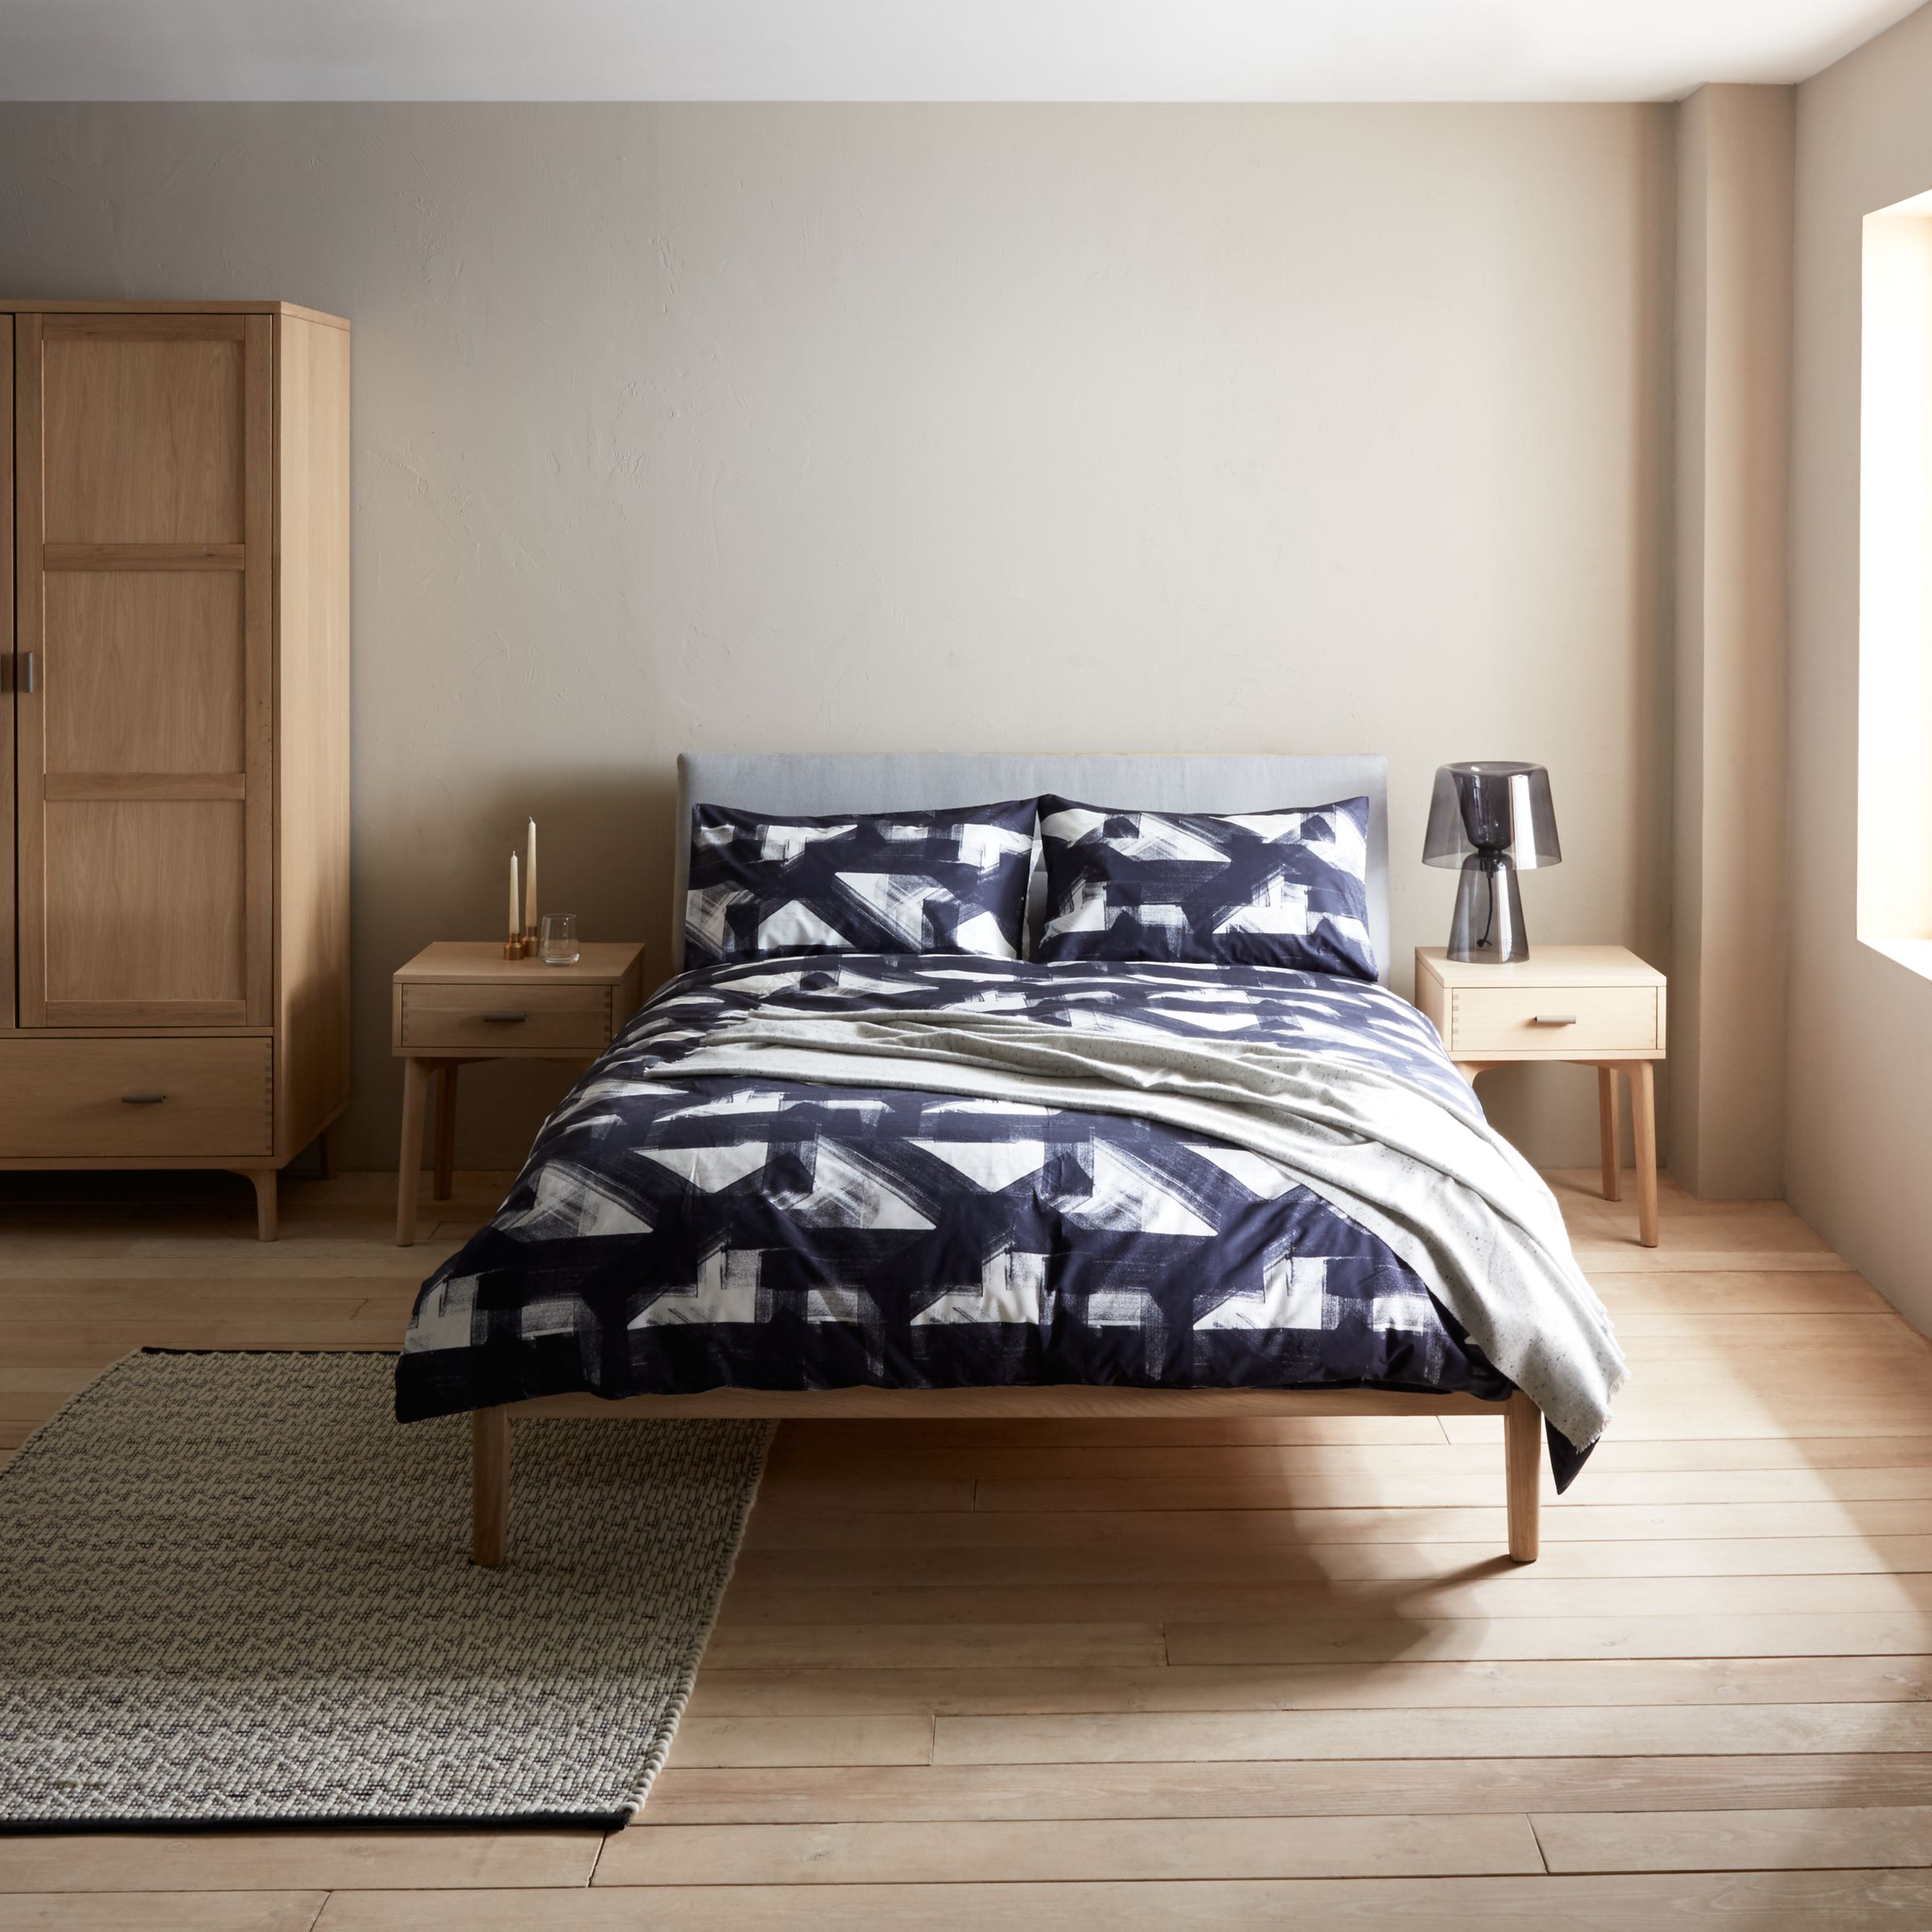 Design Project By John Lewis No 049 Bed Frame Super King Size At